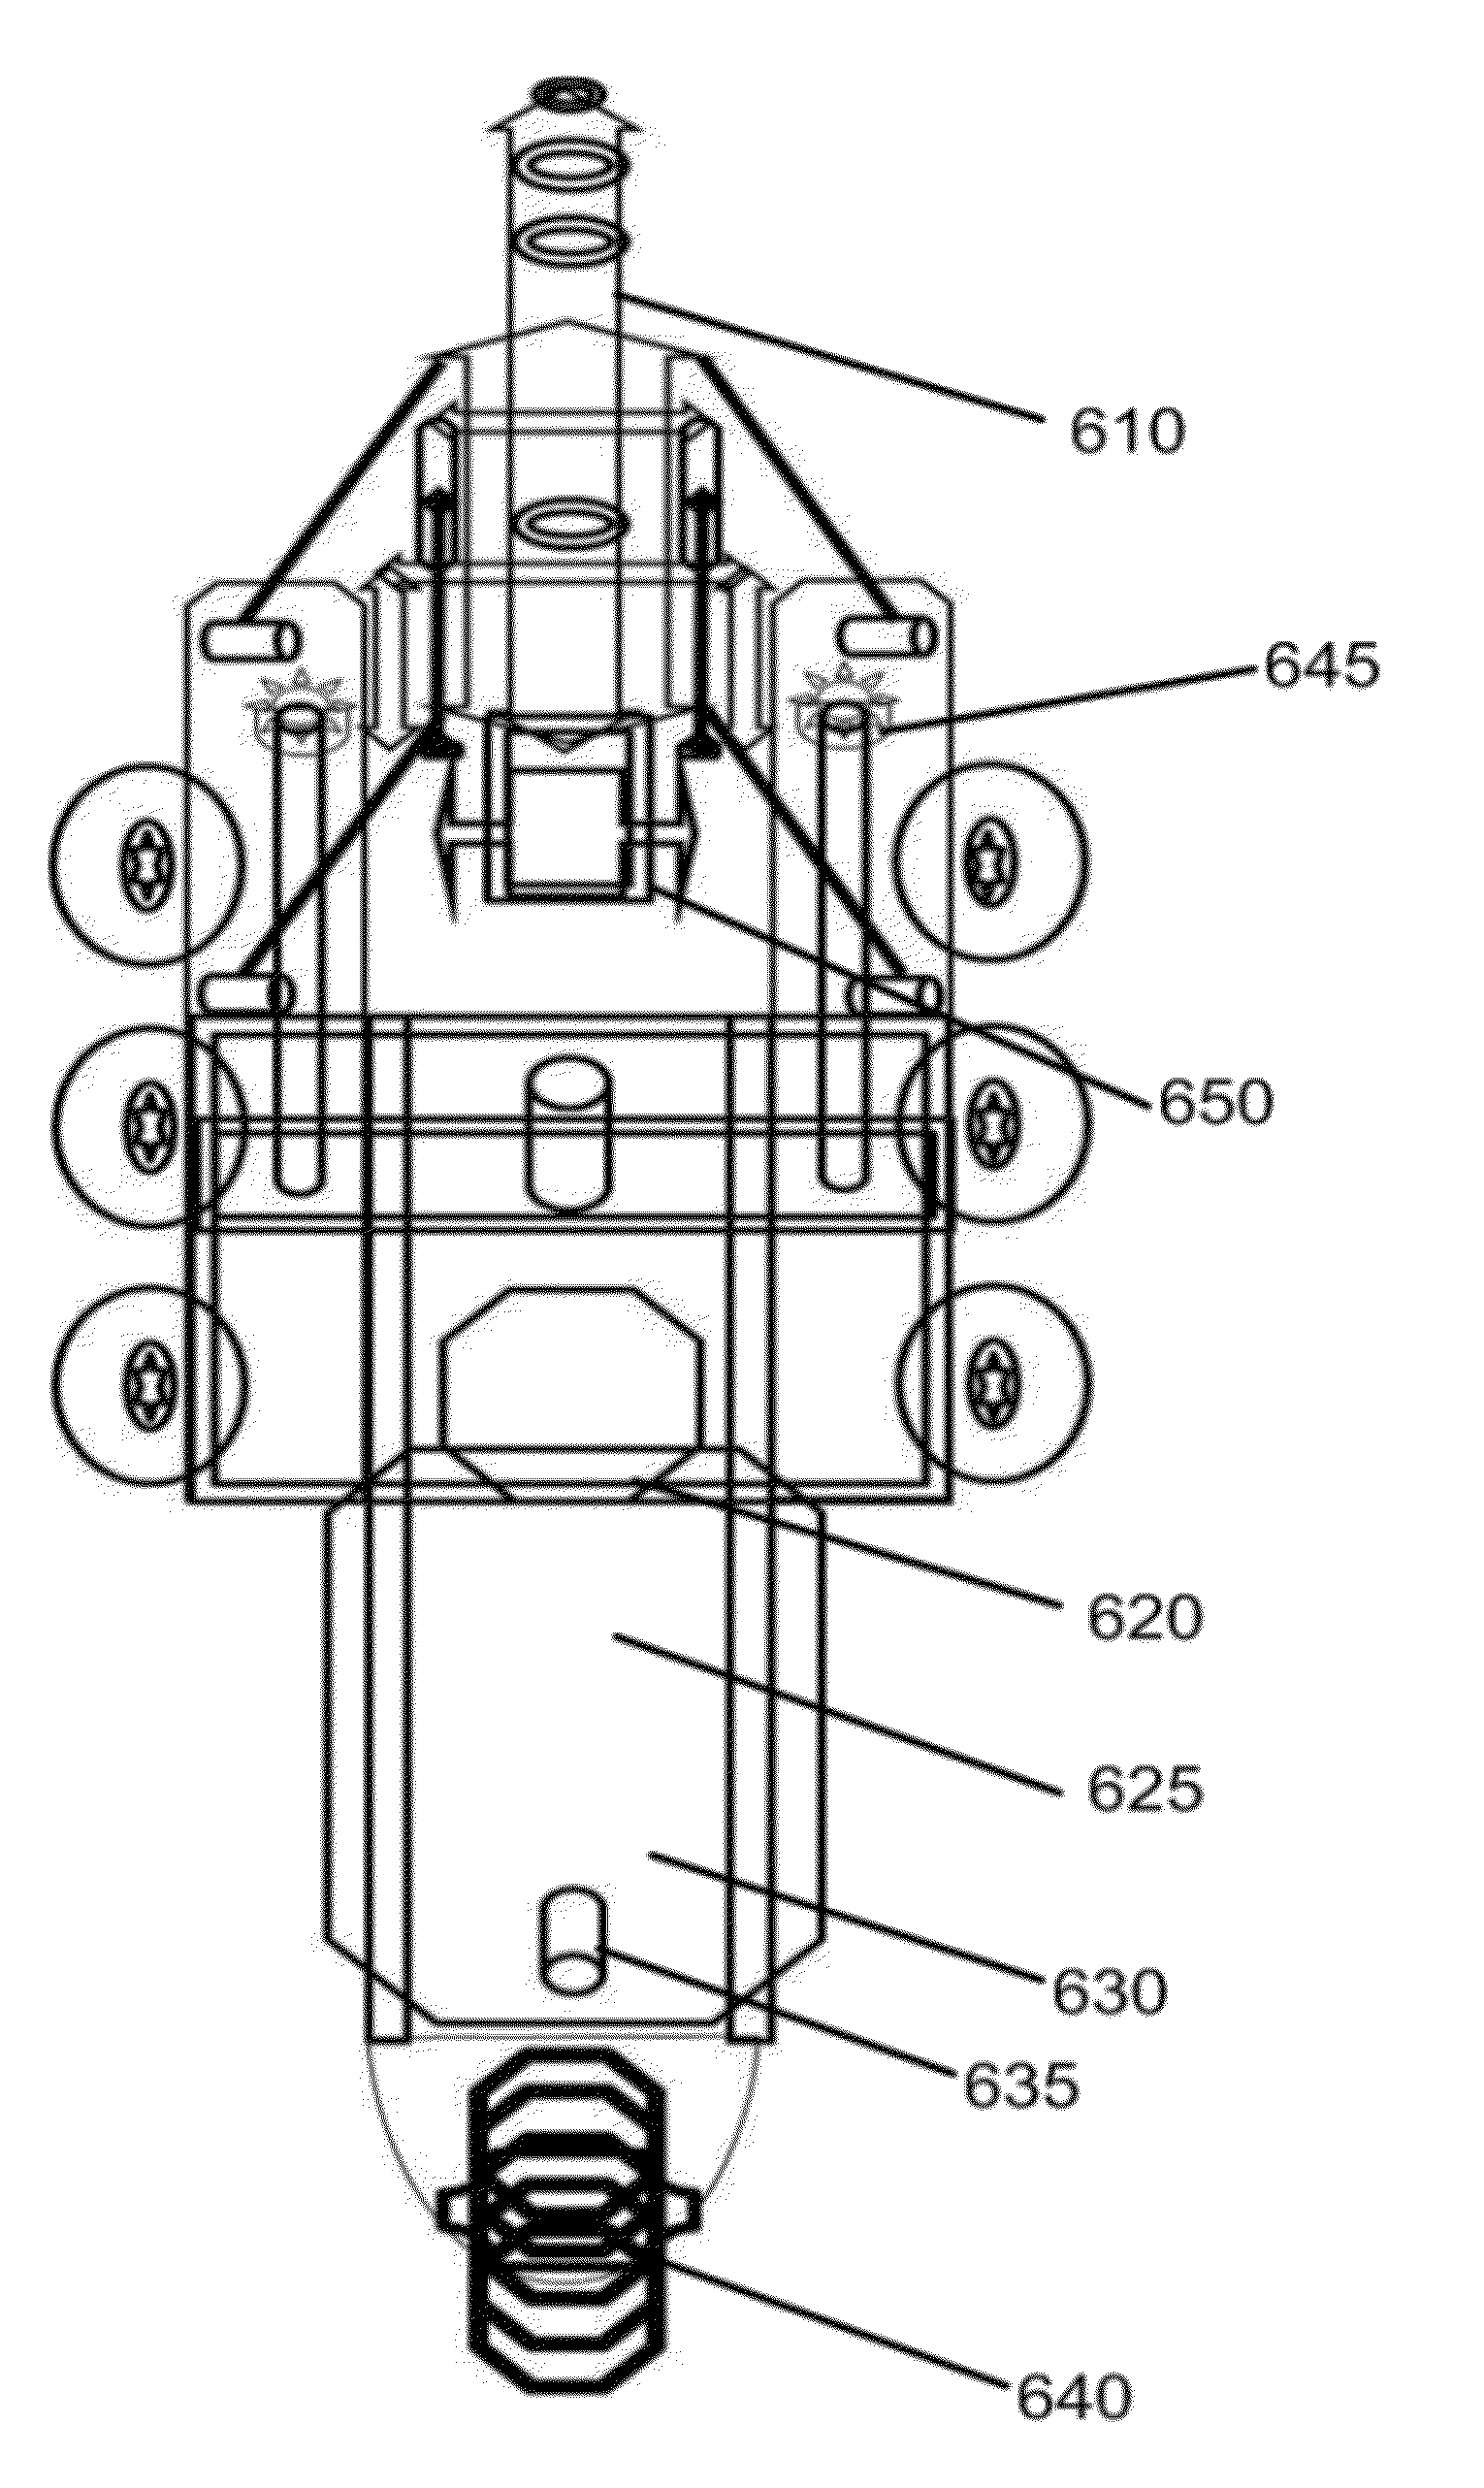 Method and Apparatus for Application of Mortar